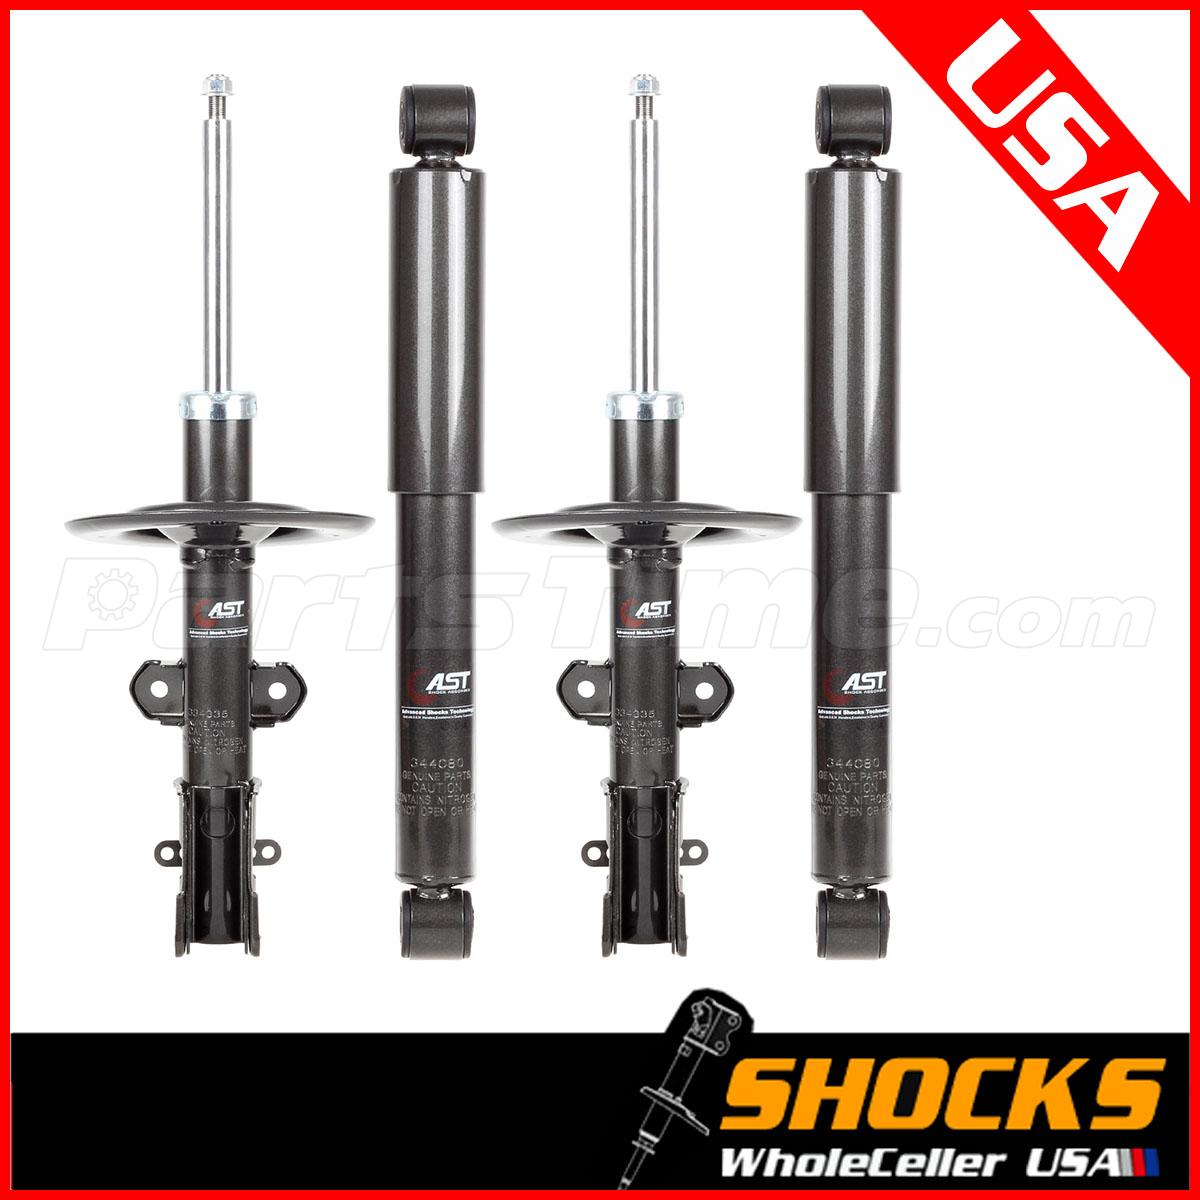 2003 Chrysler town and country shocks #1